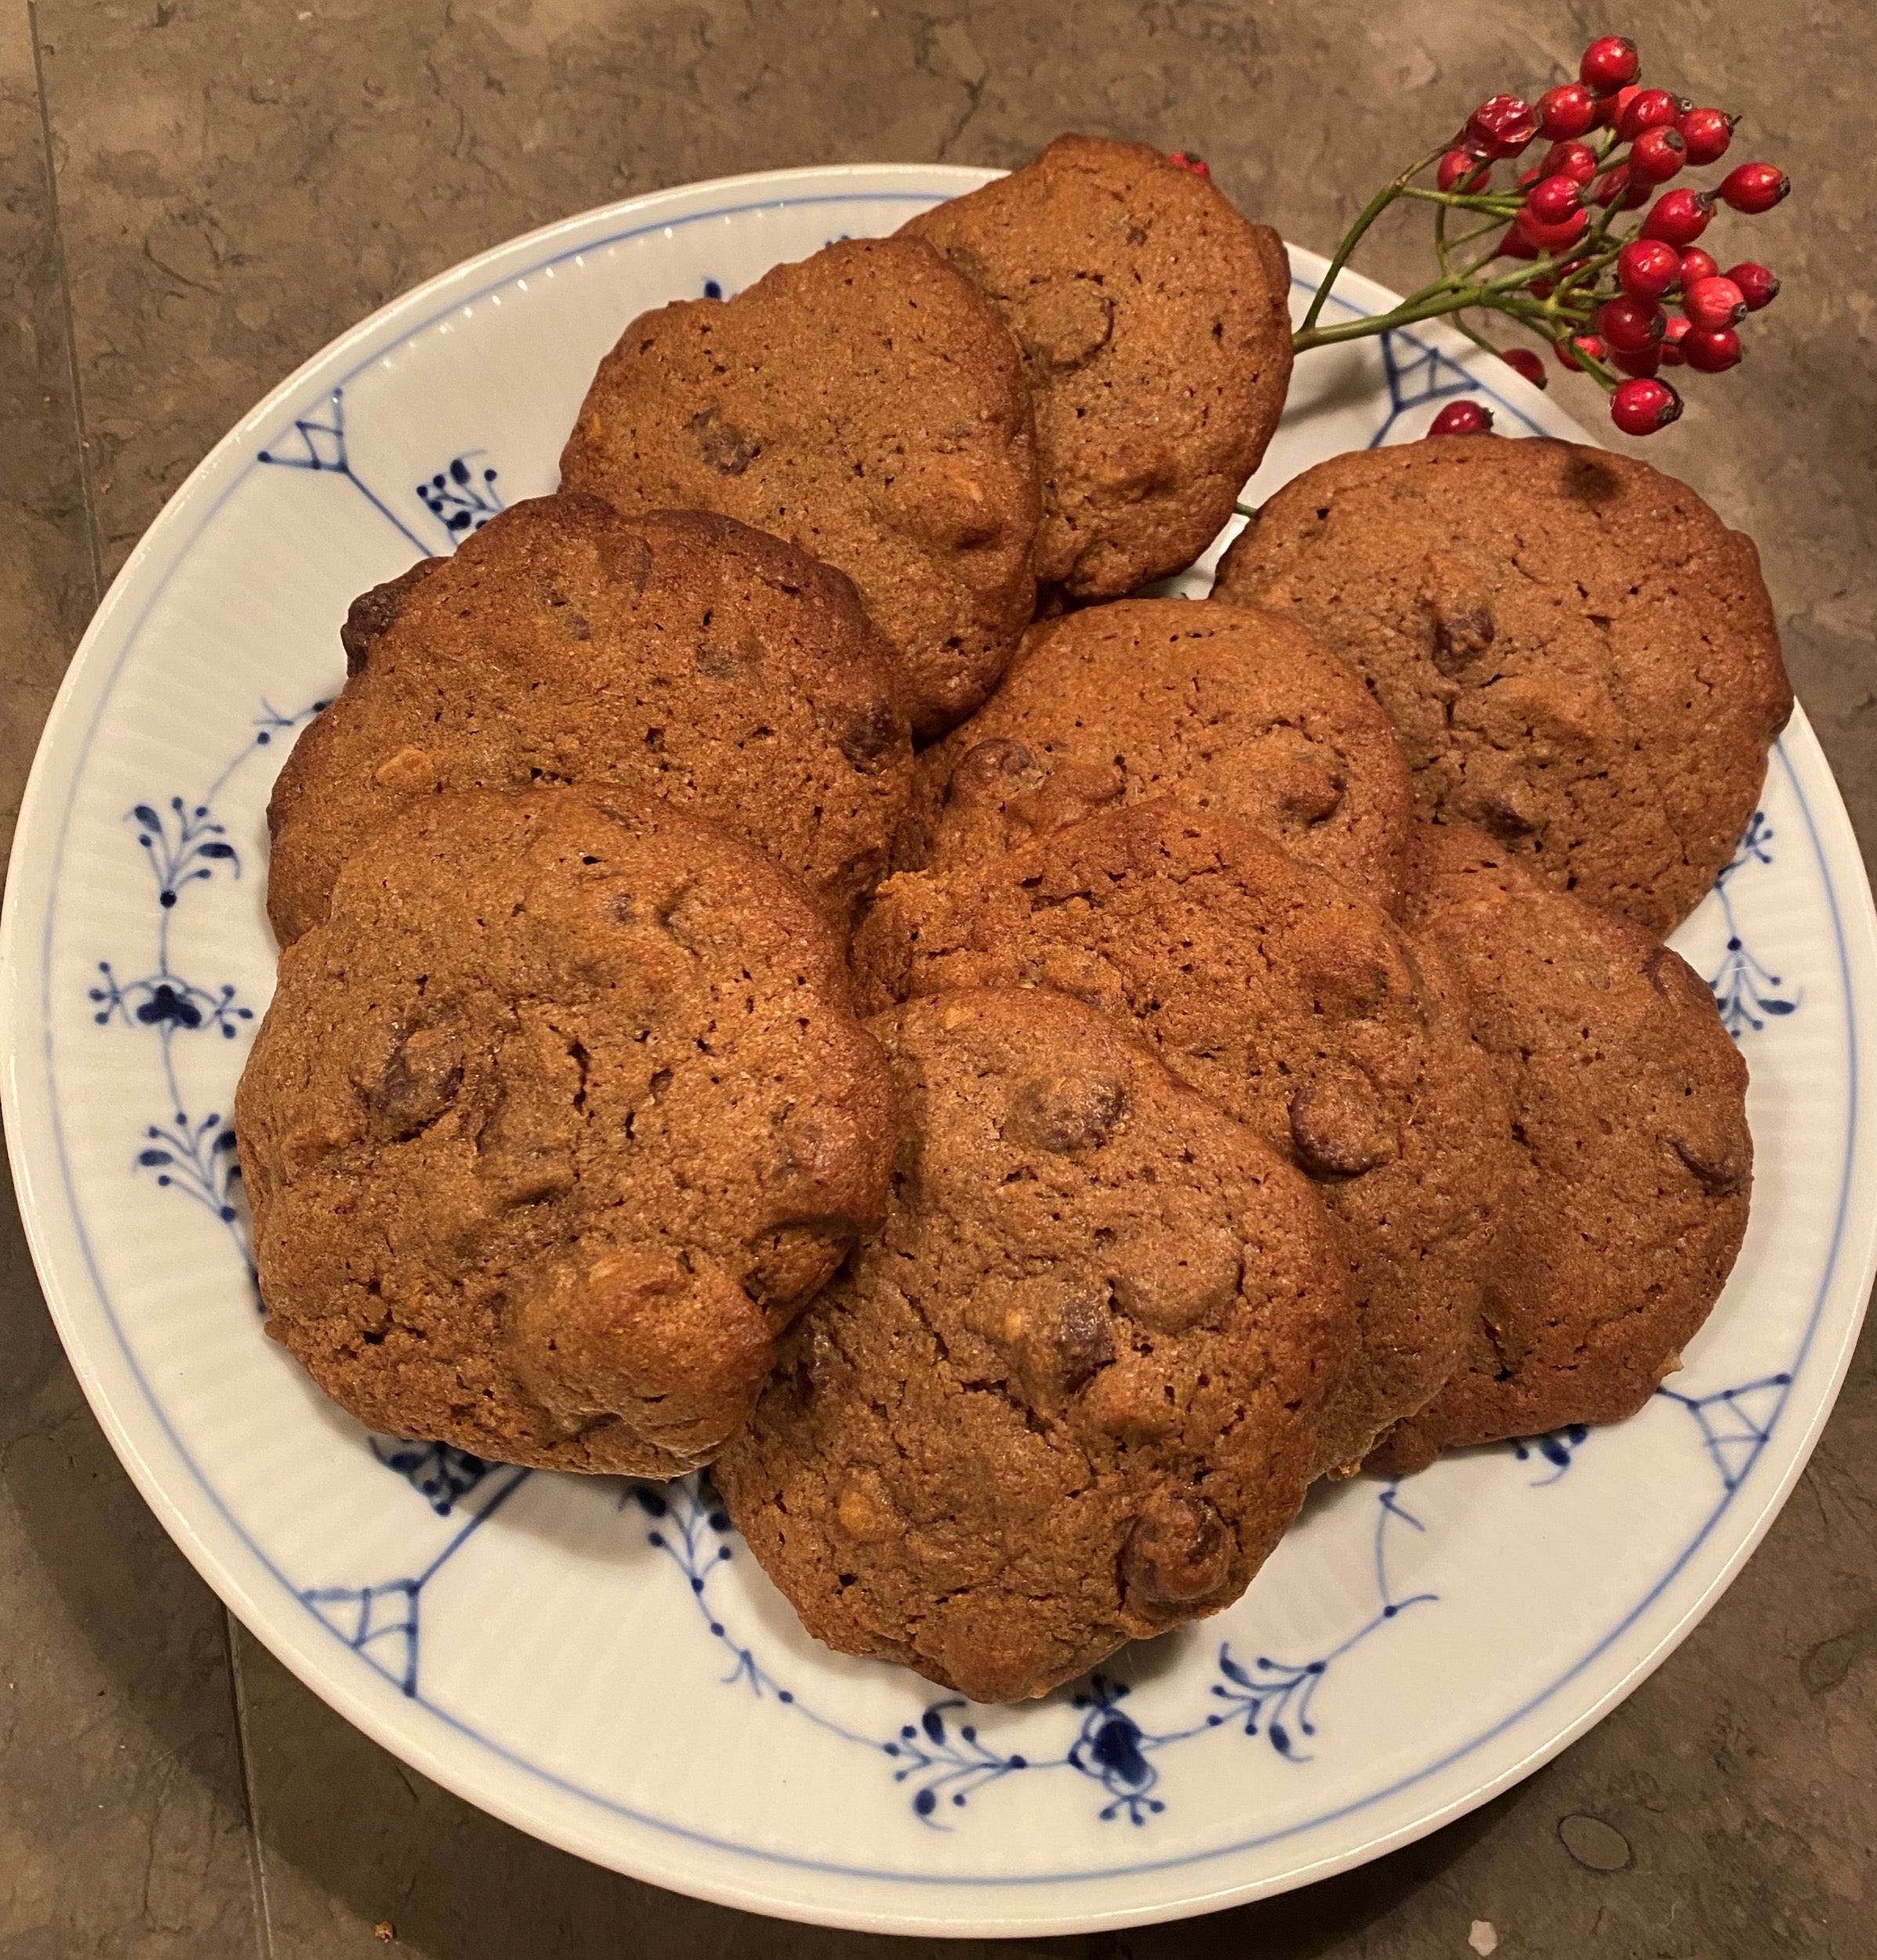 Chocolate chip and orange Cookies with 03 Stout Spent Grain Flour